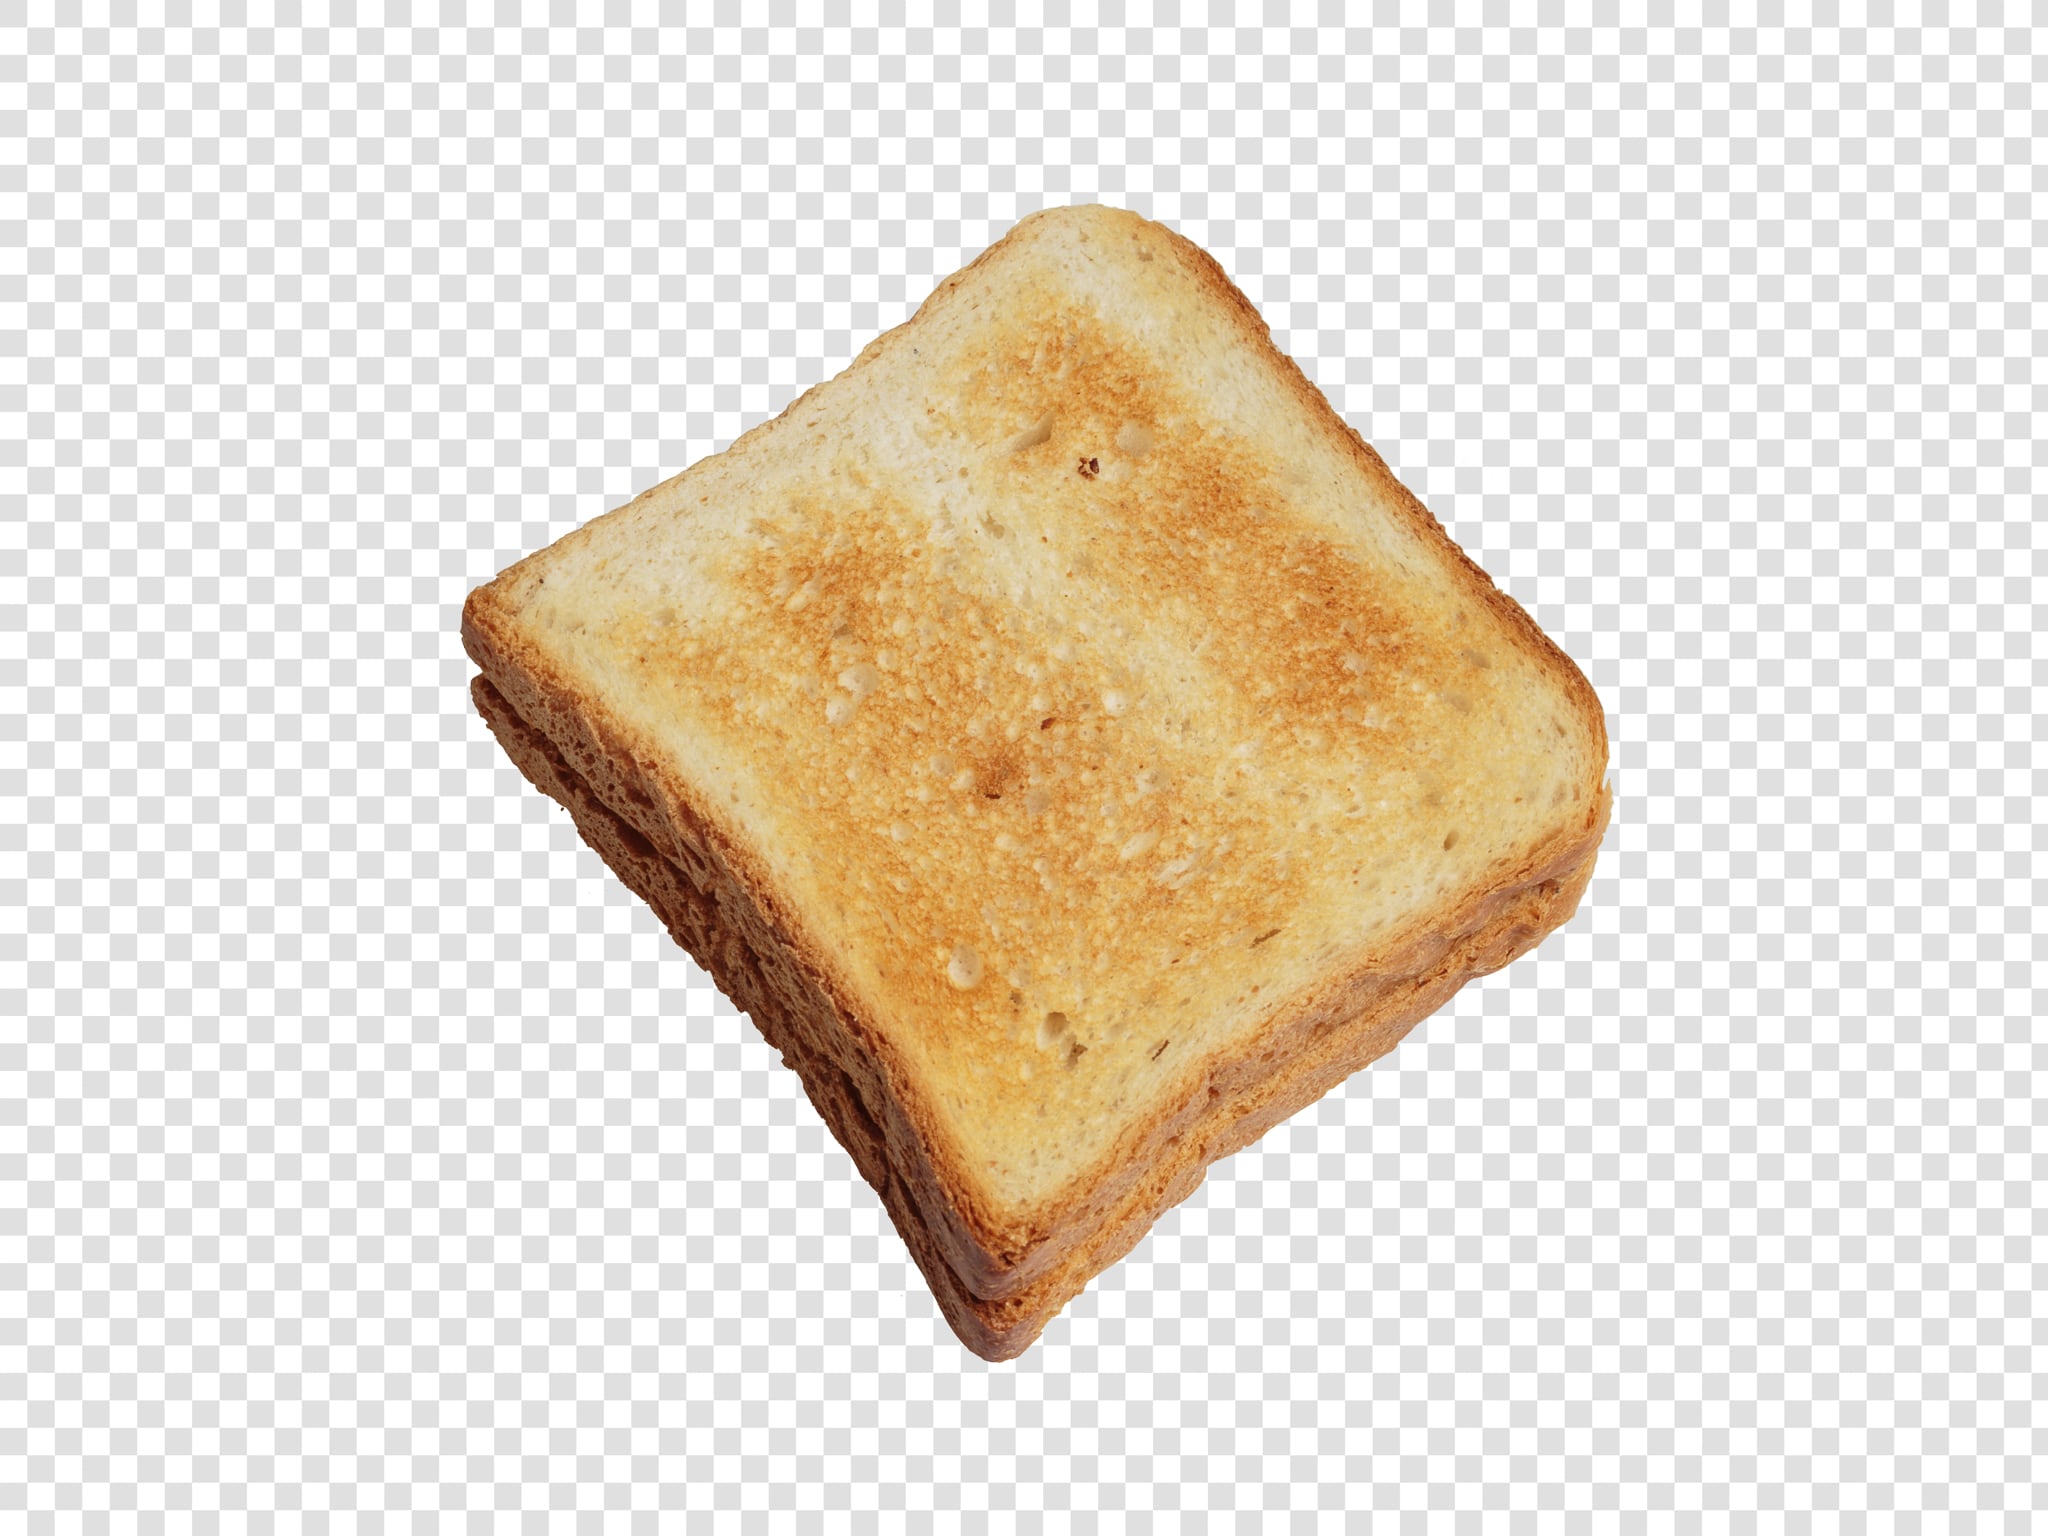 Bread PSD isolated image